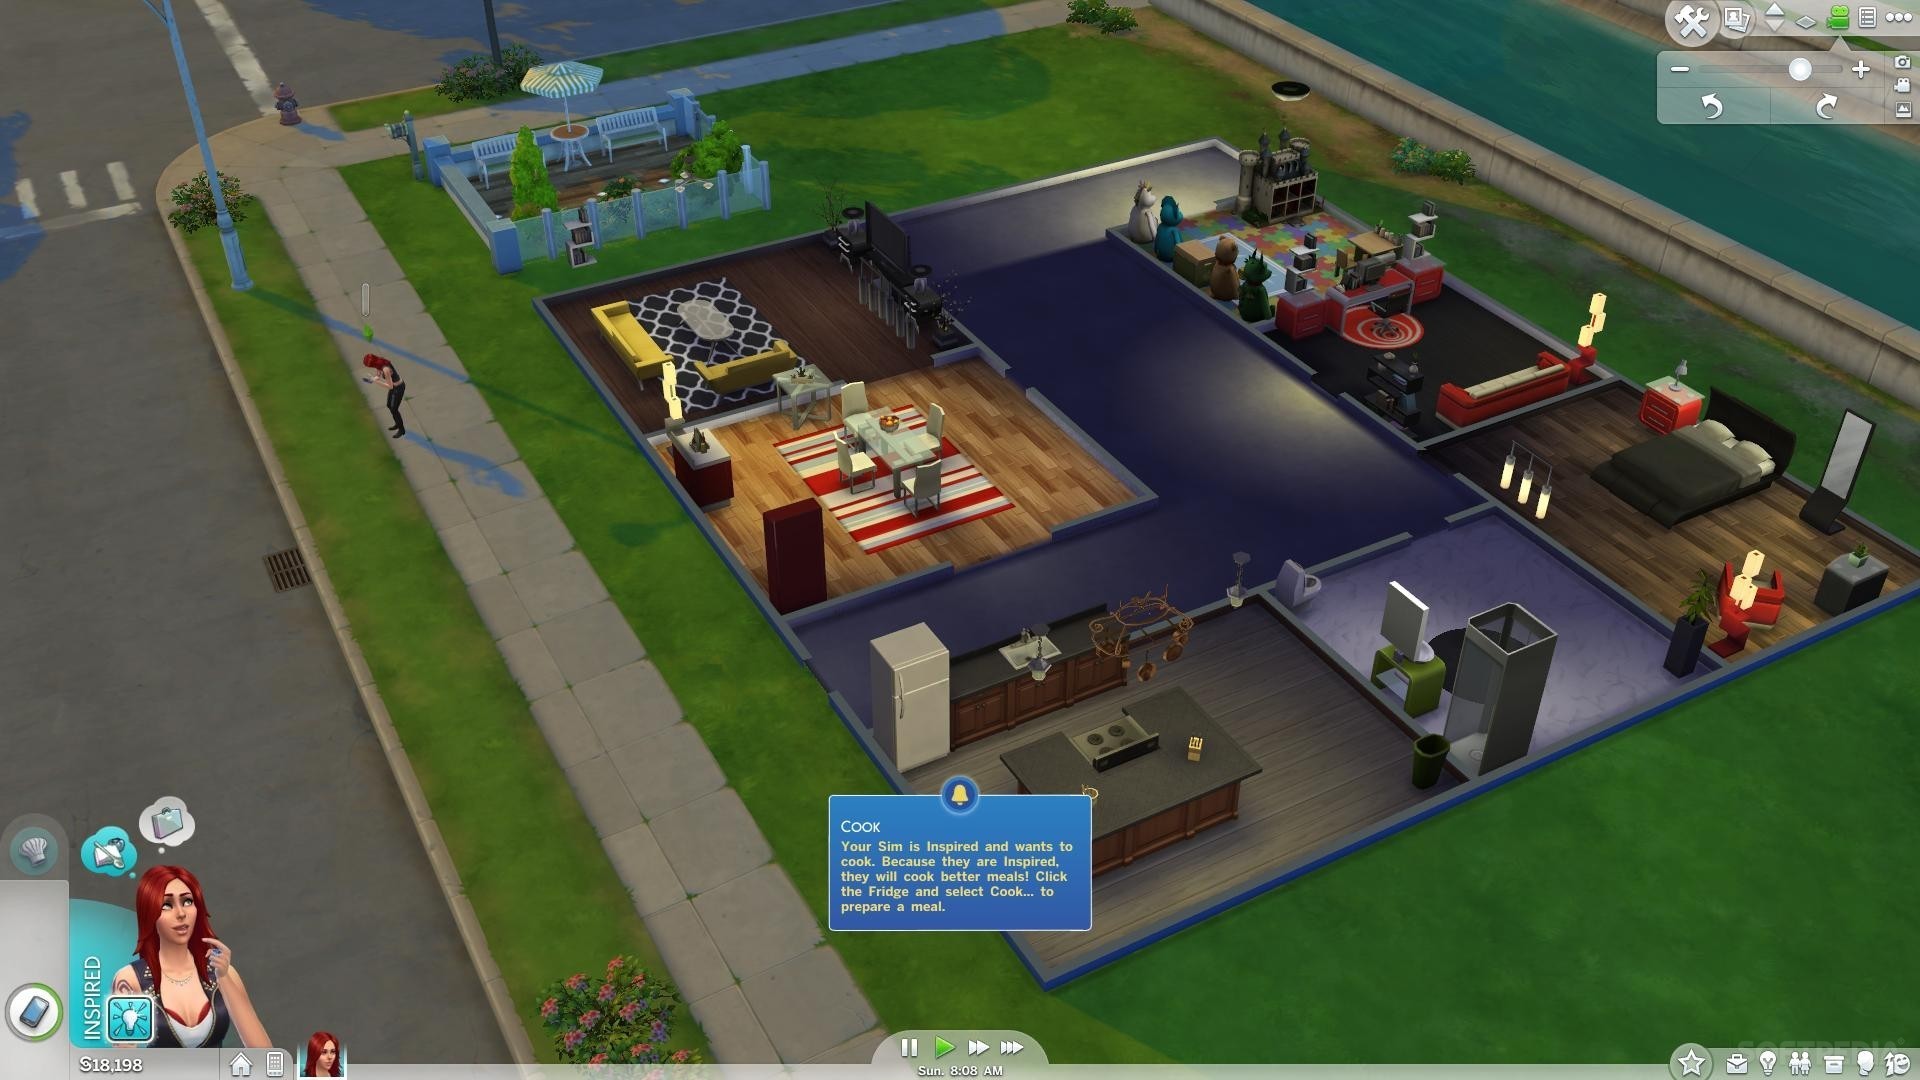 can you download sims 4 on a windows laptop